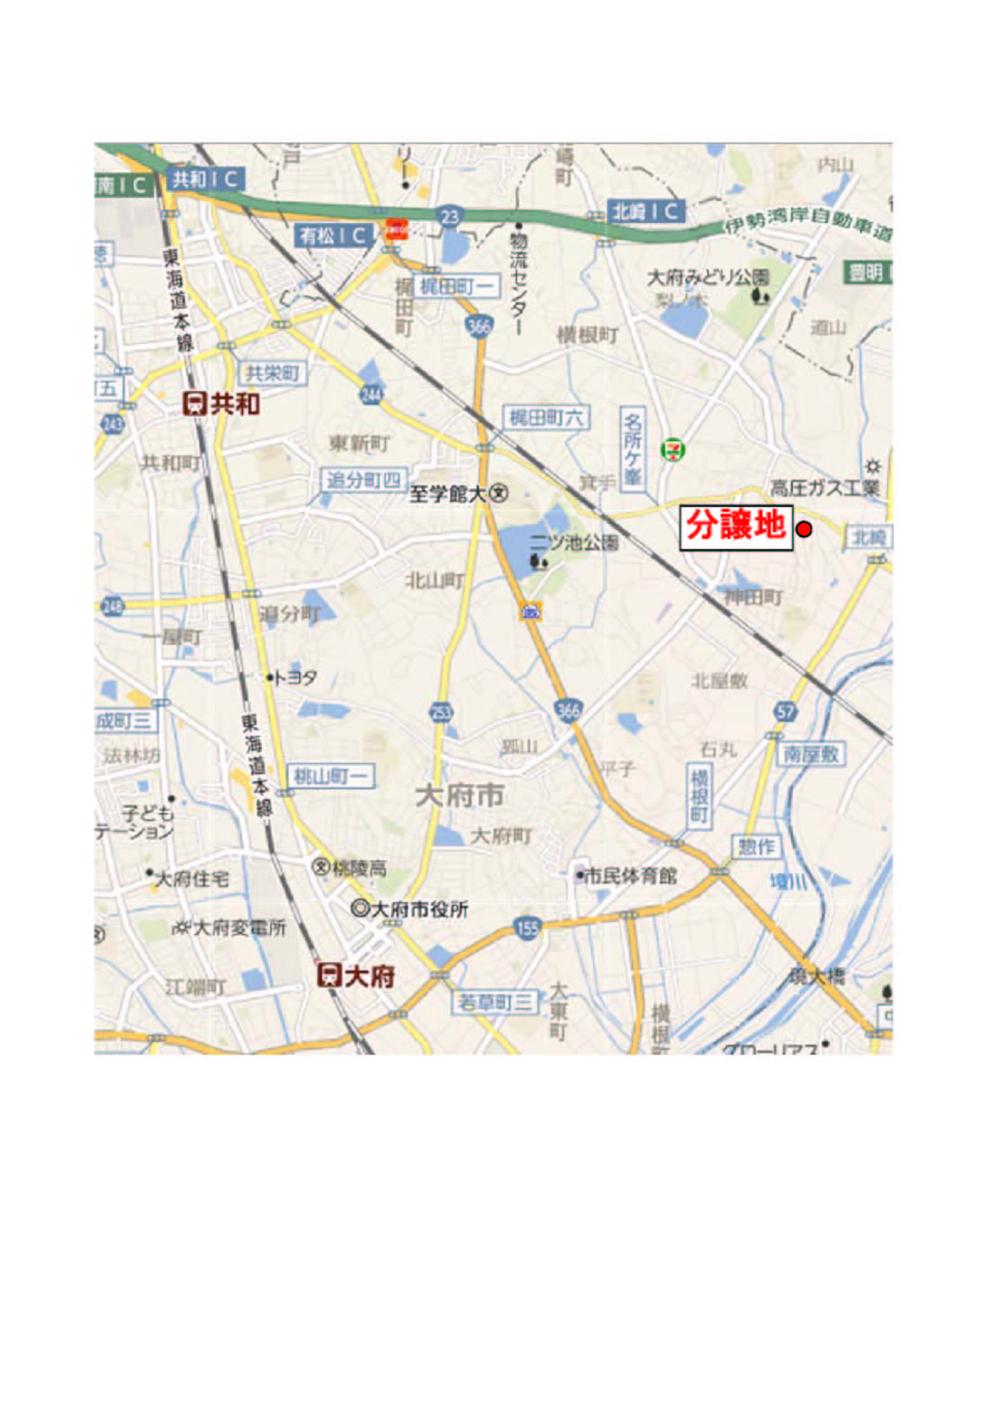 Local guide map. Please be straight north from Kanda elementary school east road. Please go on the rented map to reference or Kitazaki the intersection to the west.